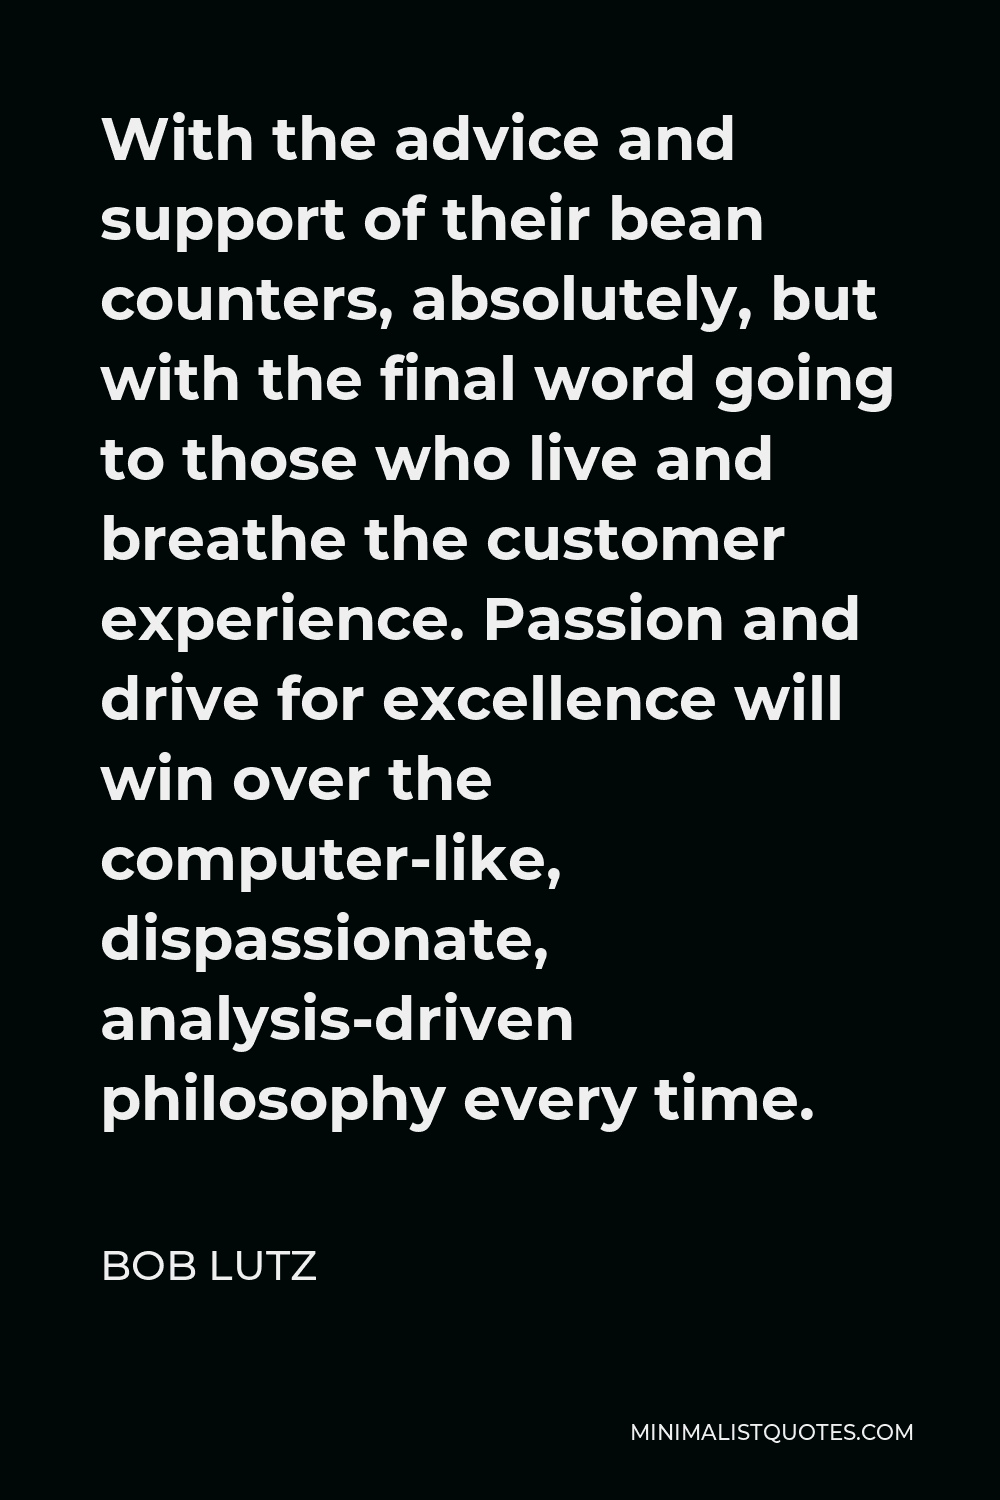 Bob Lutz Quote - With the advice and support of their bean counters, absolutely, but with the final word going to those who live and breathe the customer experience. Passion and drive for excellence will win over the computer-like, dispassionate, analysis-driven philosophy every time.